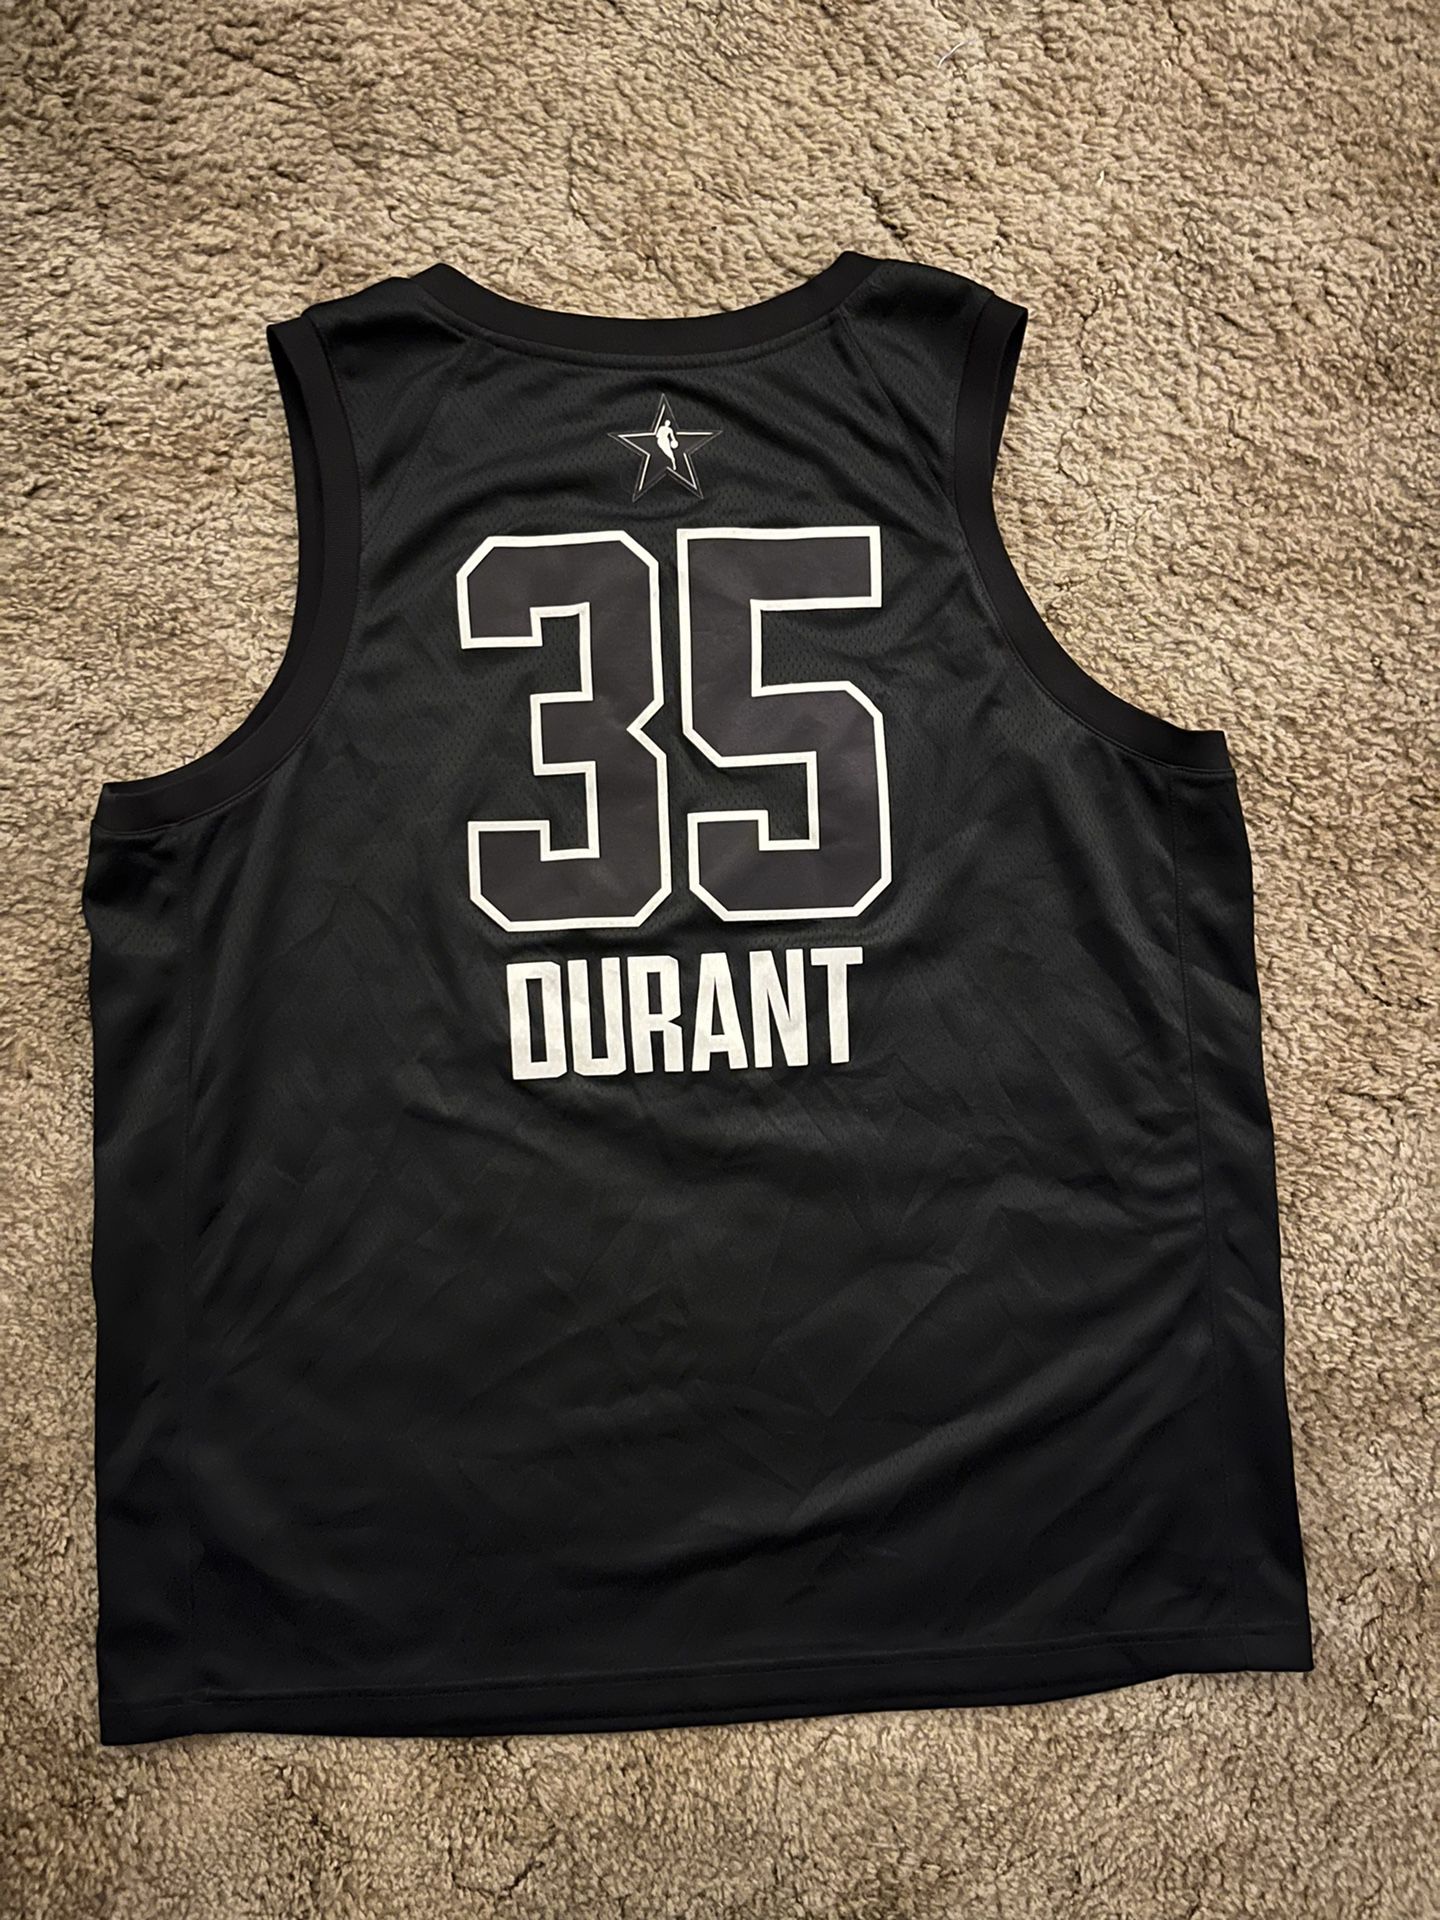 BNIB Kevin Durant Golden State Warriors Jersey Brand New for Sale in San  Jose, CA - OfferUp